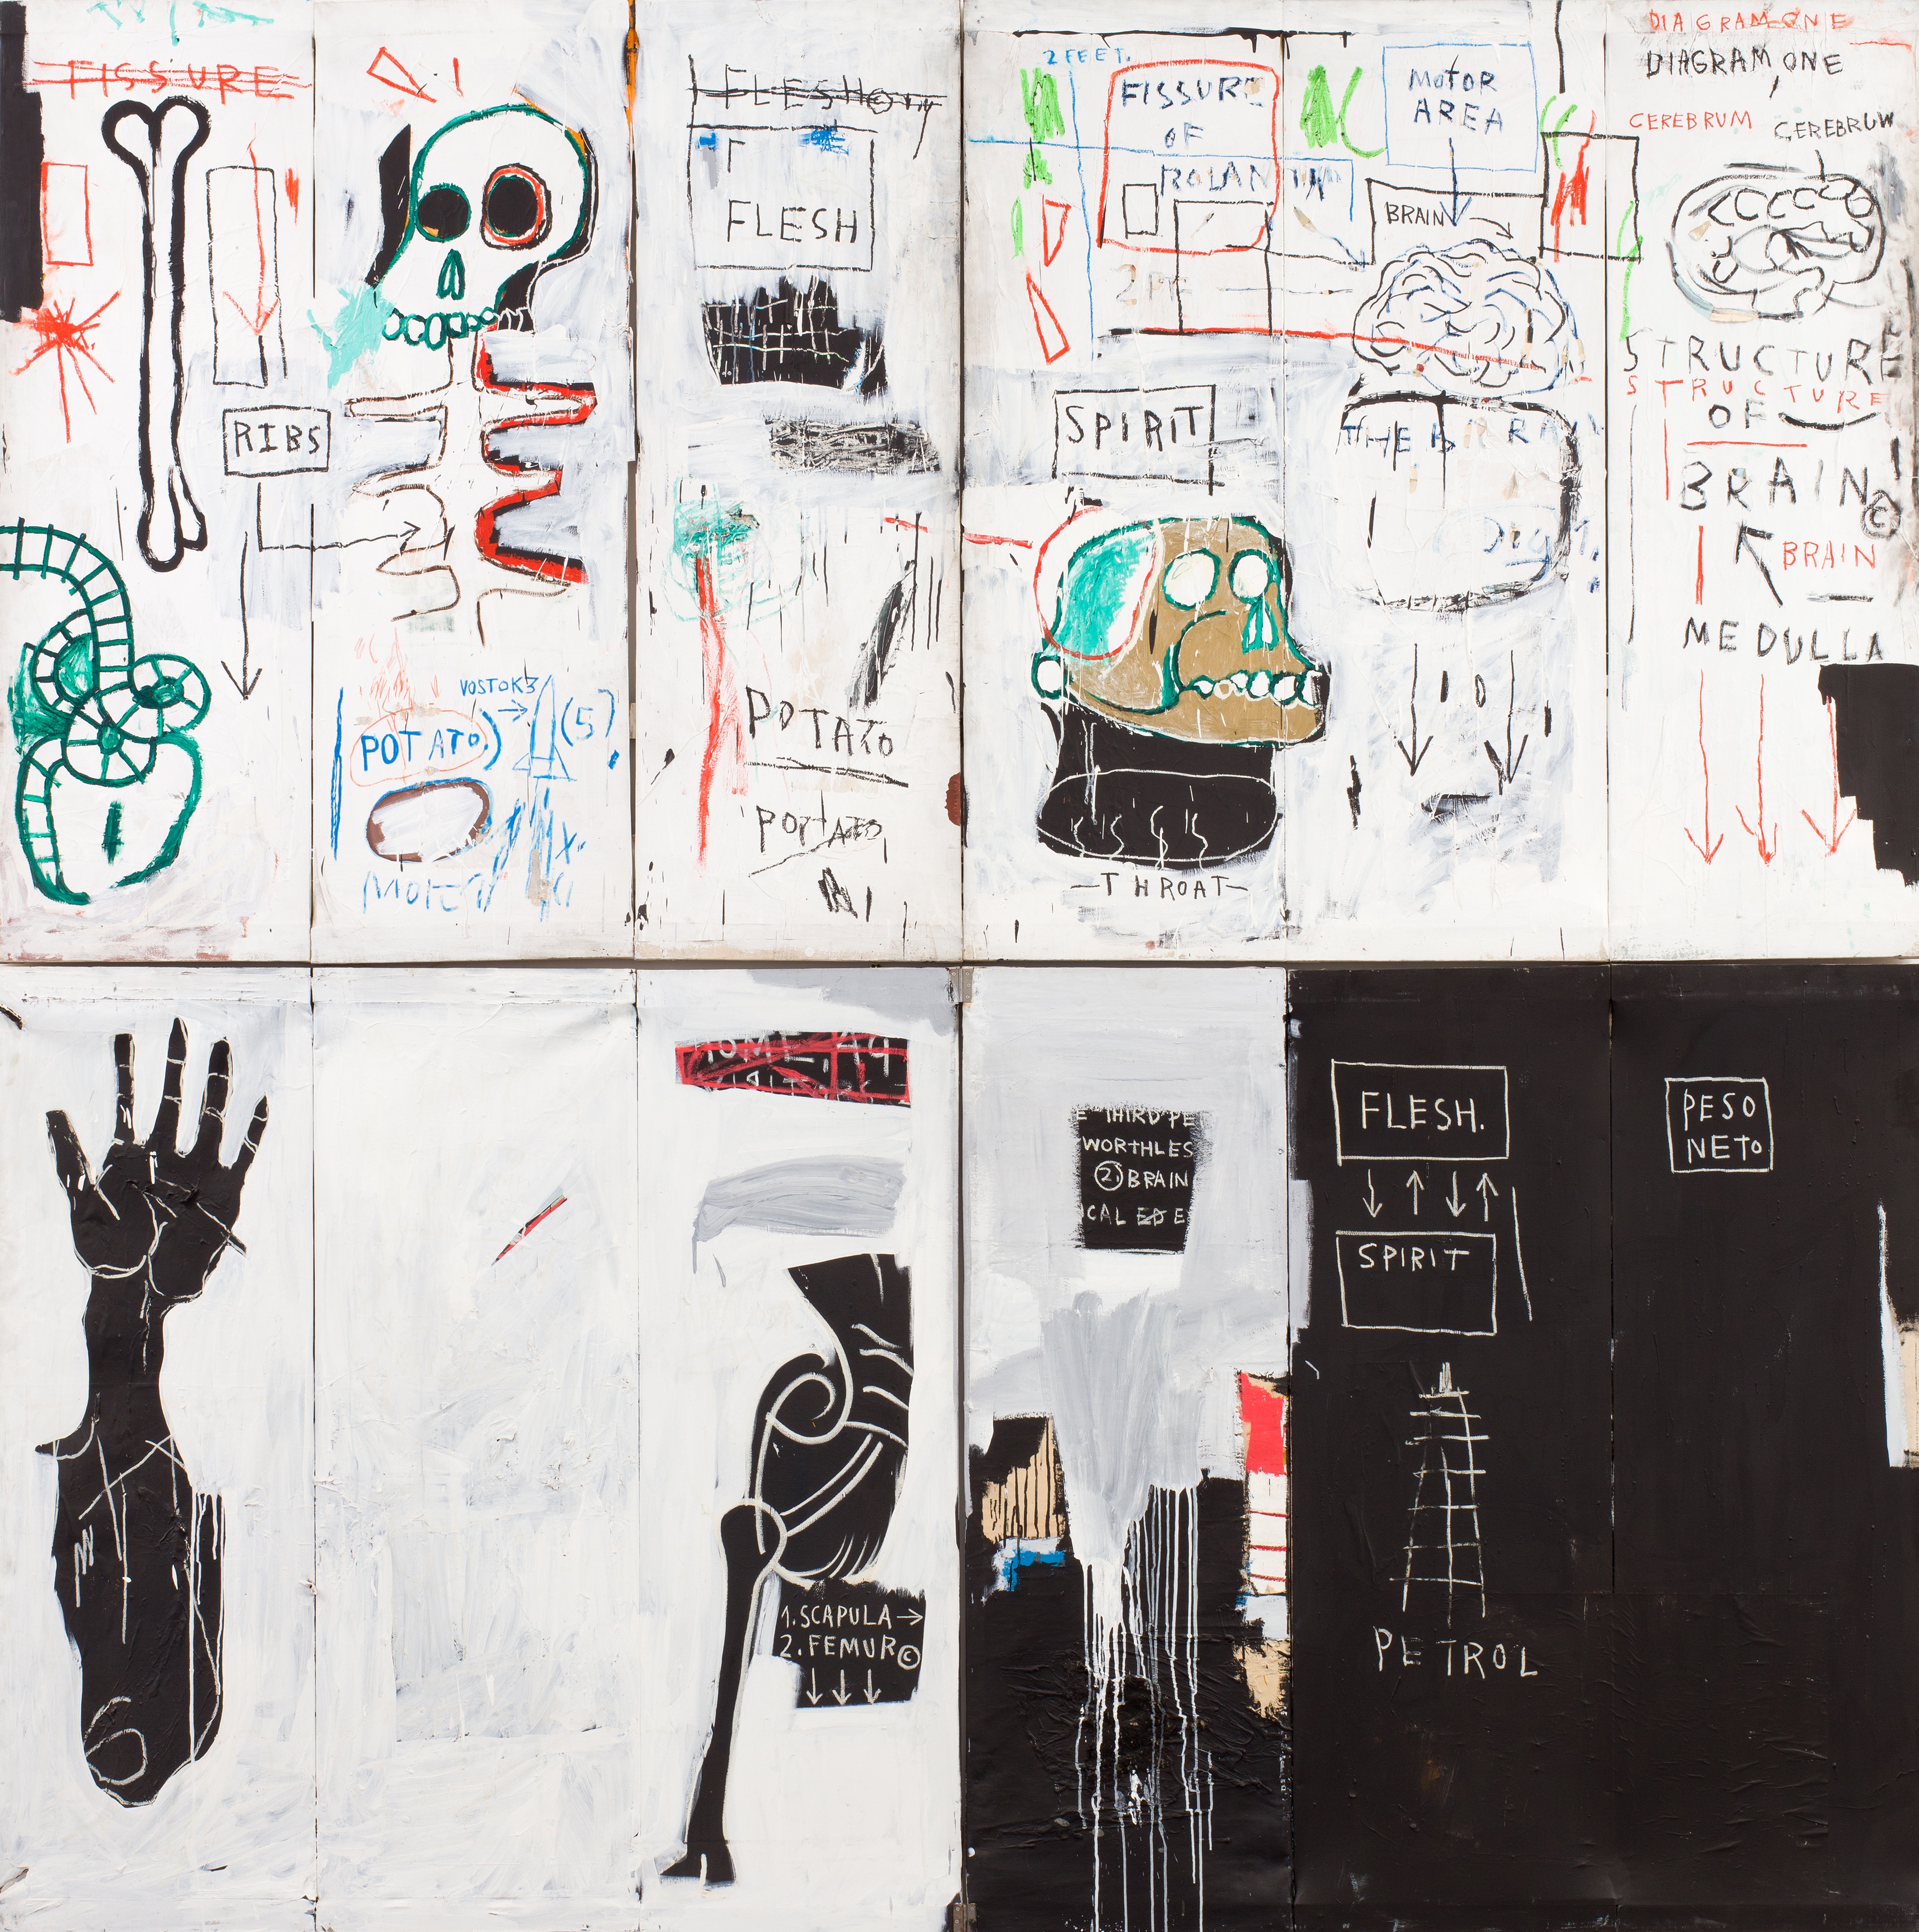 Jean-Michel Basquiat
Flesh and Spirit, 1982/83
Acrylic, oilstick and paper collage on canvas, two panels
Parker Foundation Autor: Courtesy of Fredrik Nilsen. On loan from the Parker Foundation © Estate of Jean-Michel Basquiat. Licensed by Artestar, New York
